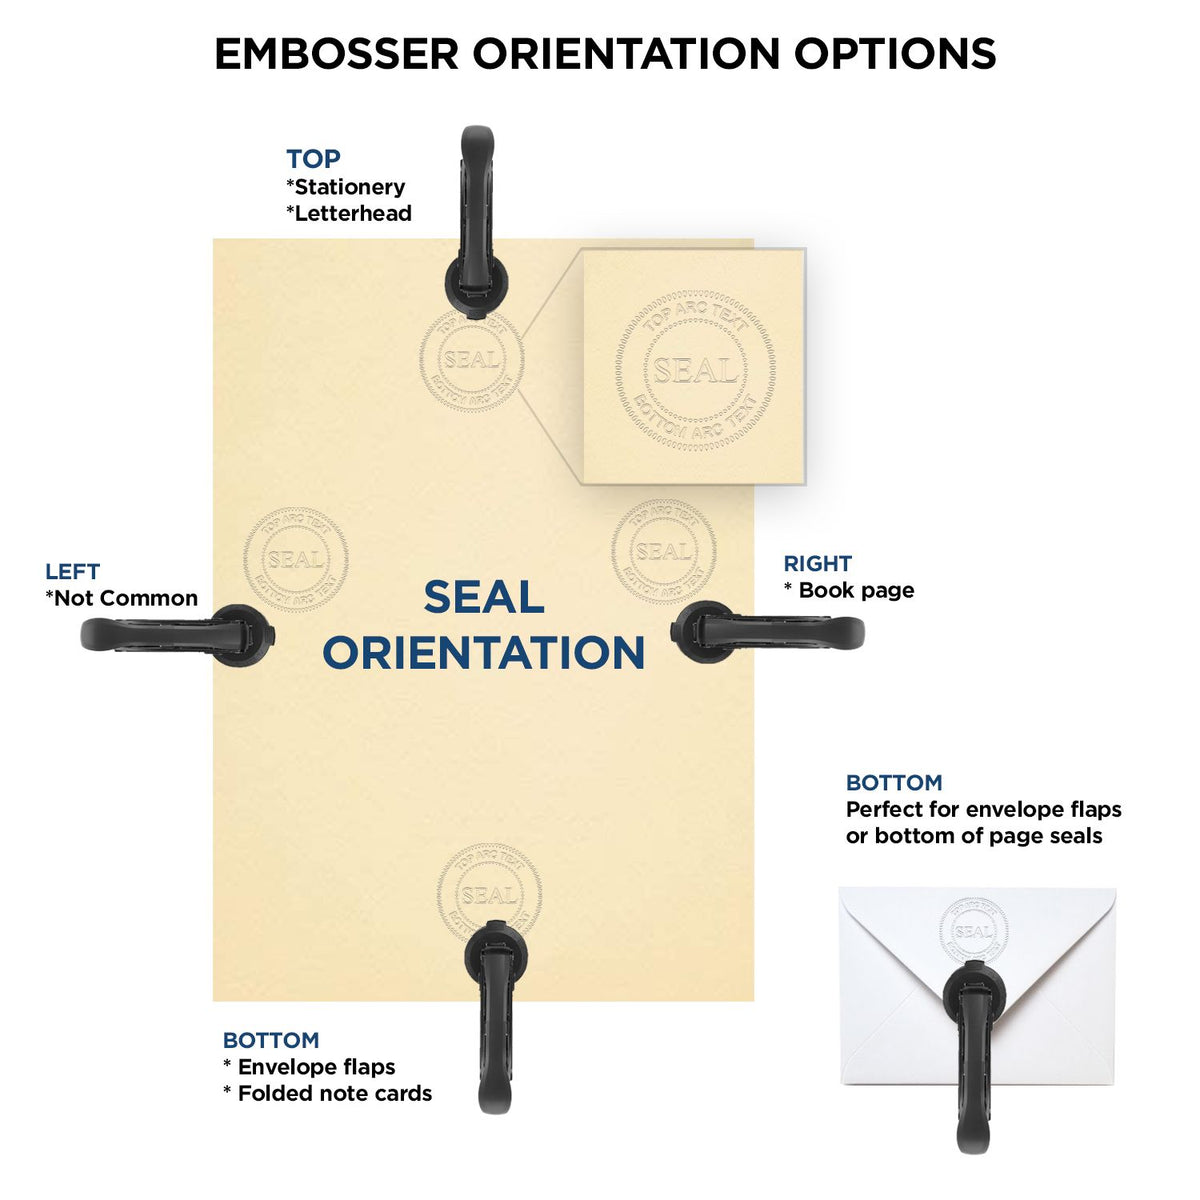 An infographic for the Hybrid Texas Land Surveyor Seal showing embosser orientation, this is showing examples of a top, bottom, right and left insert.